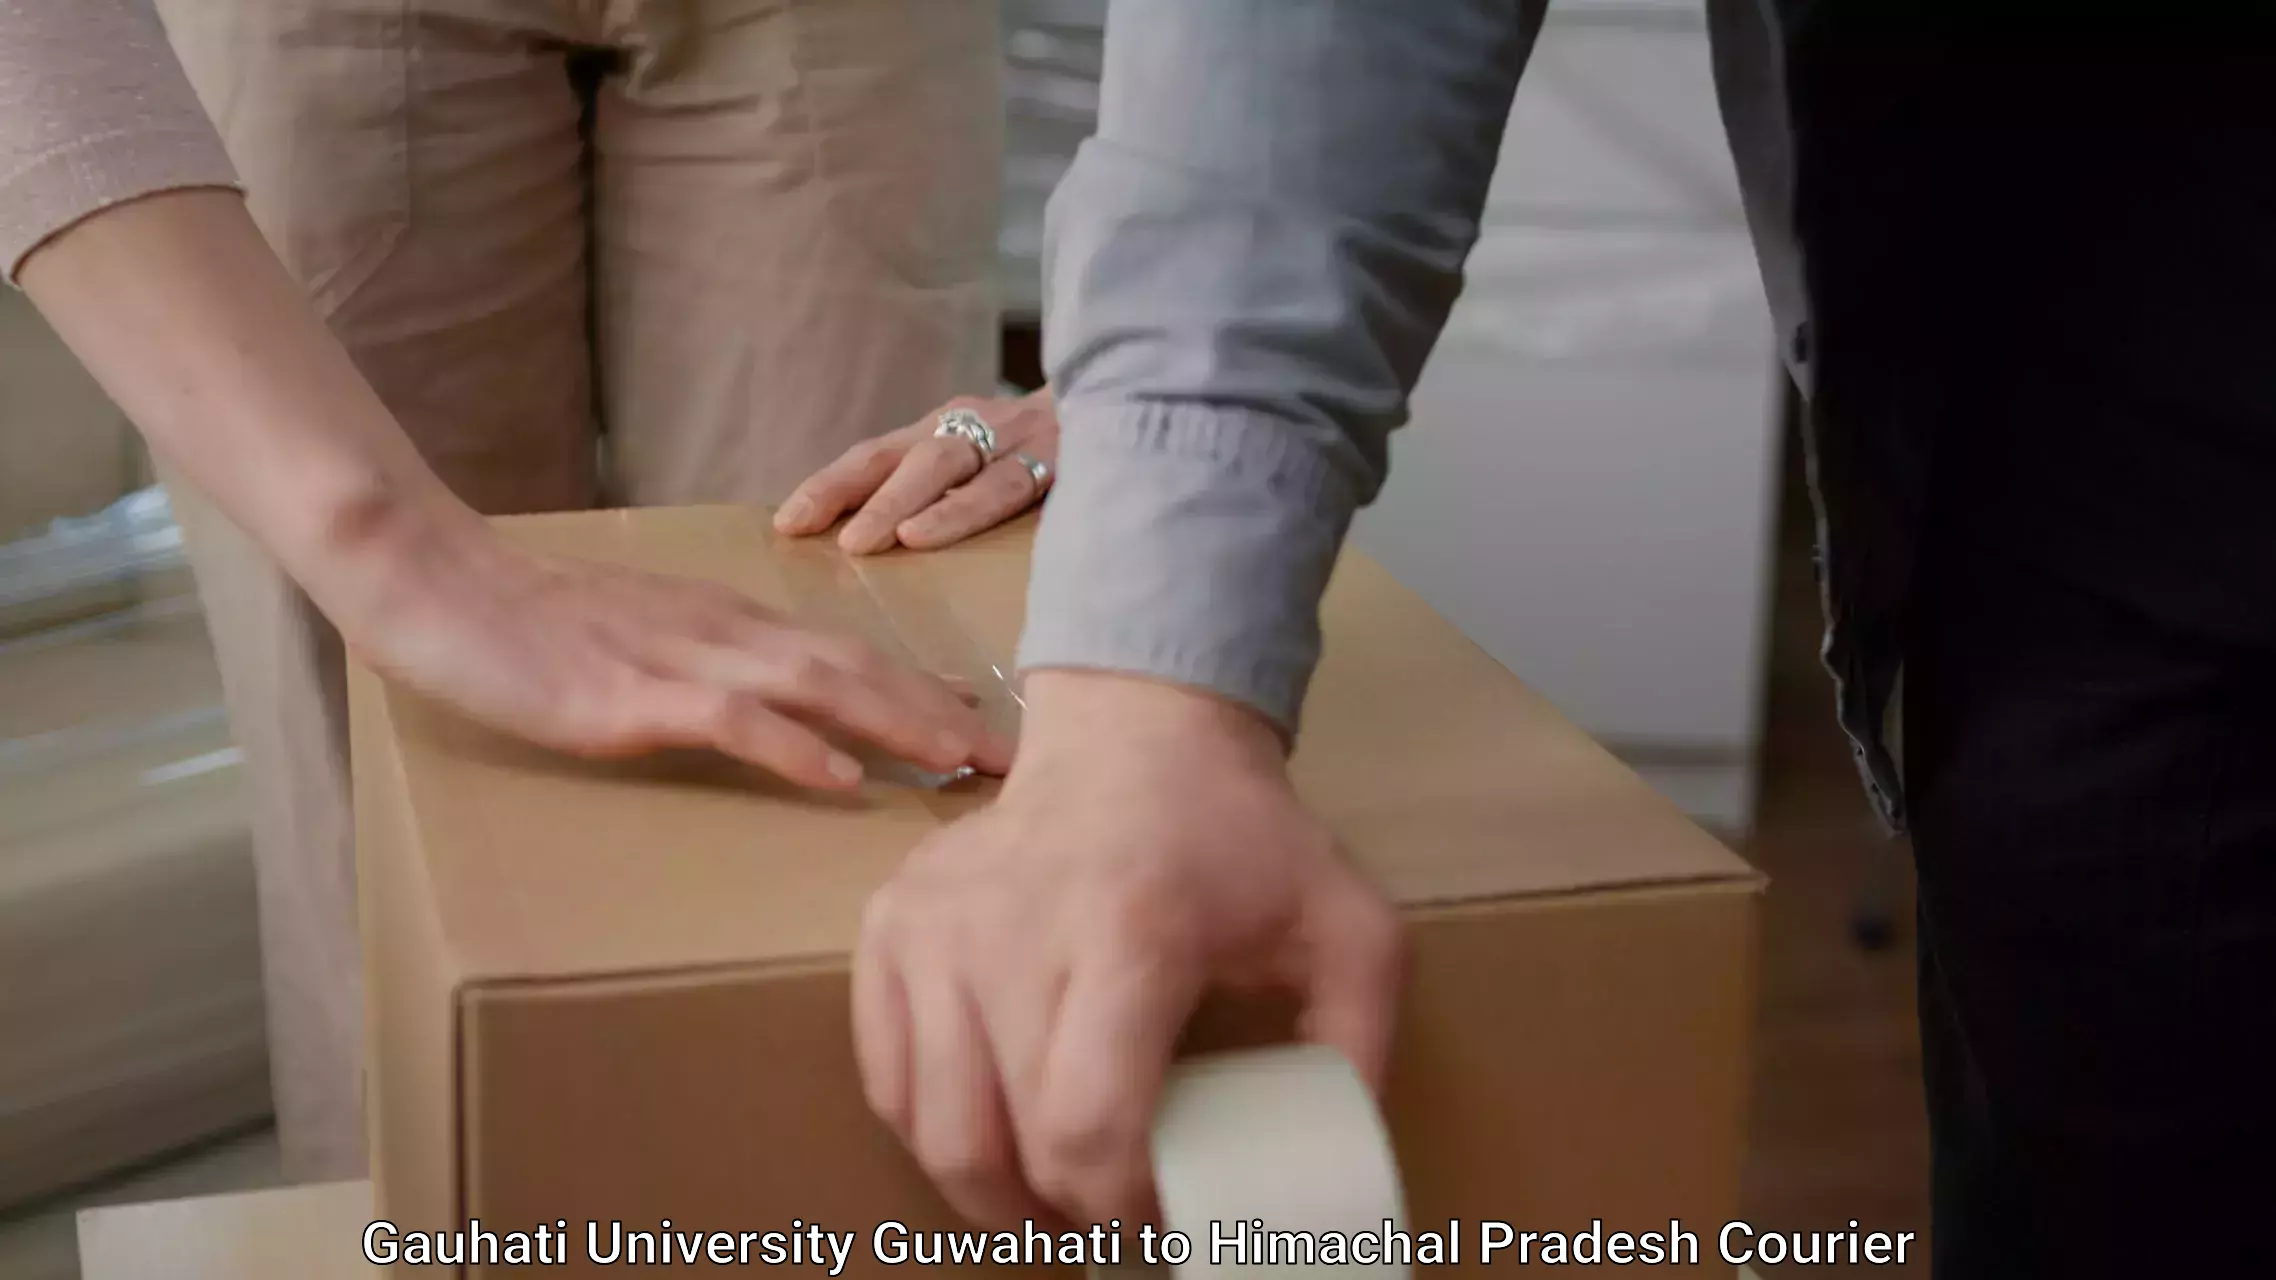 Efficient relocation services in Gauhati University Guwahati to Palion